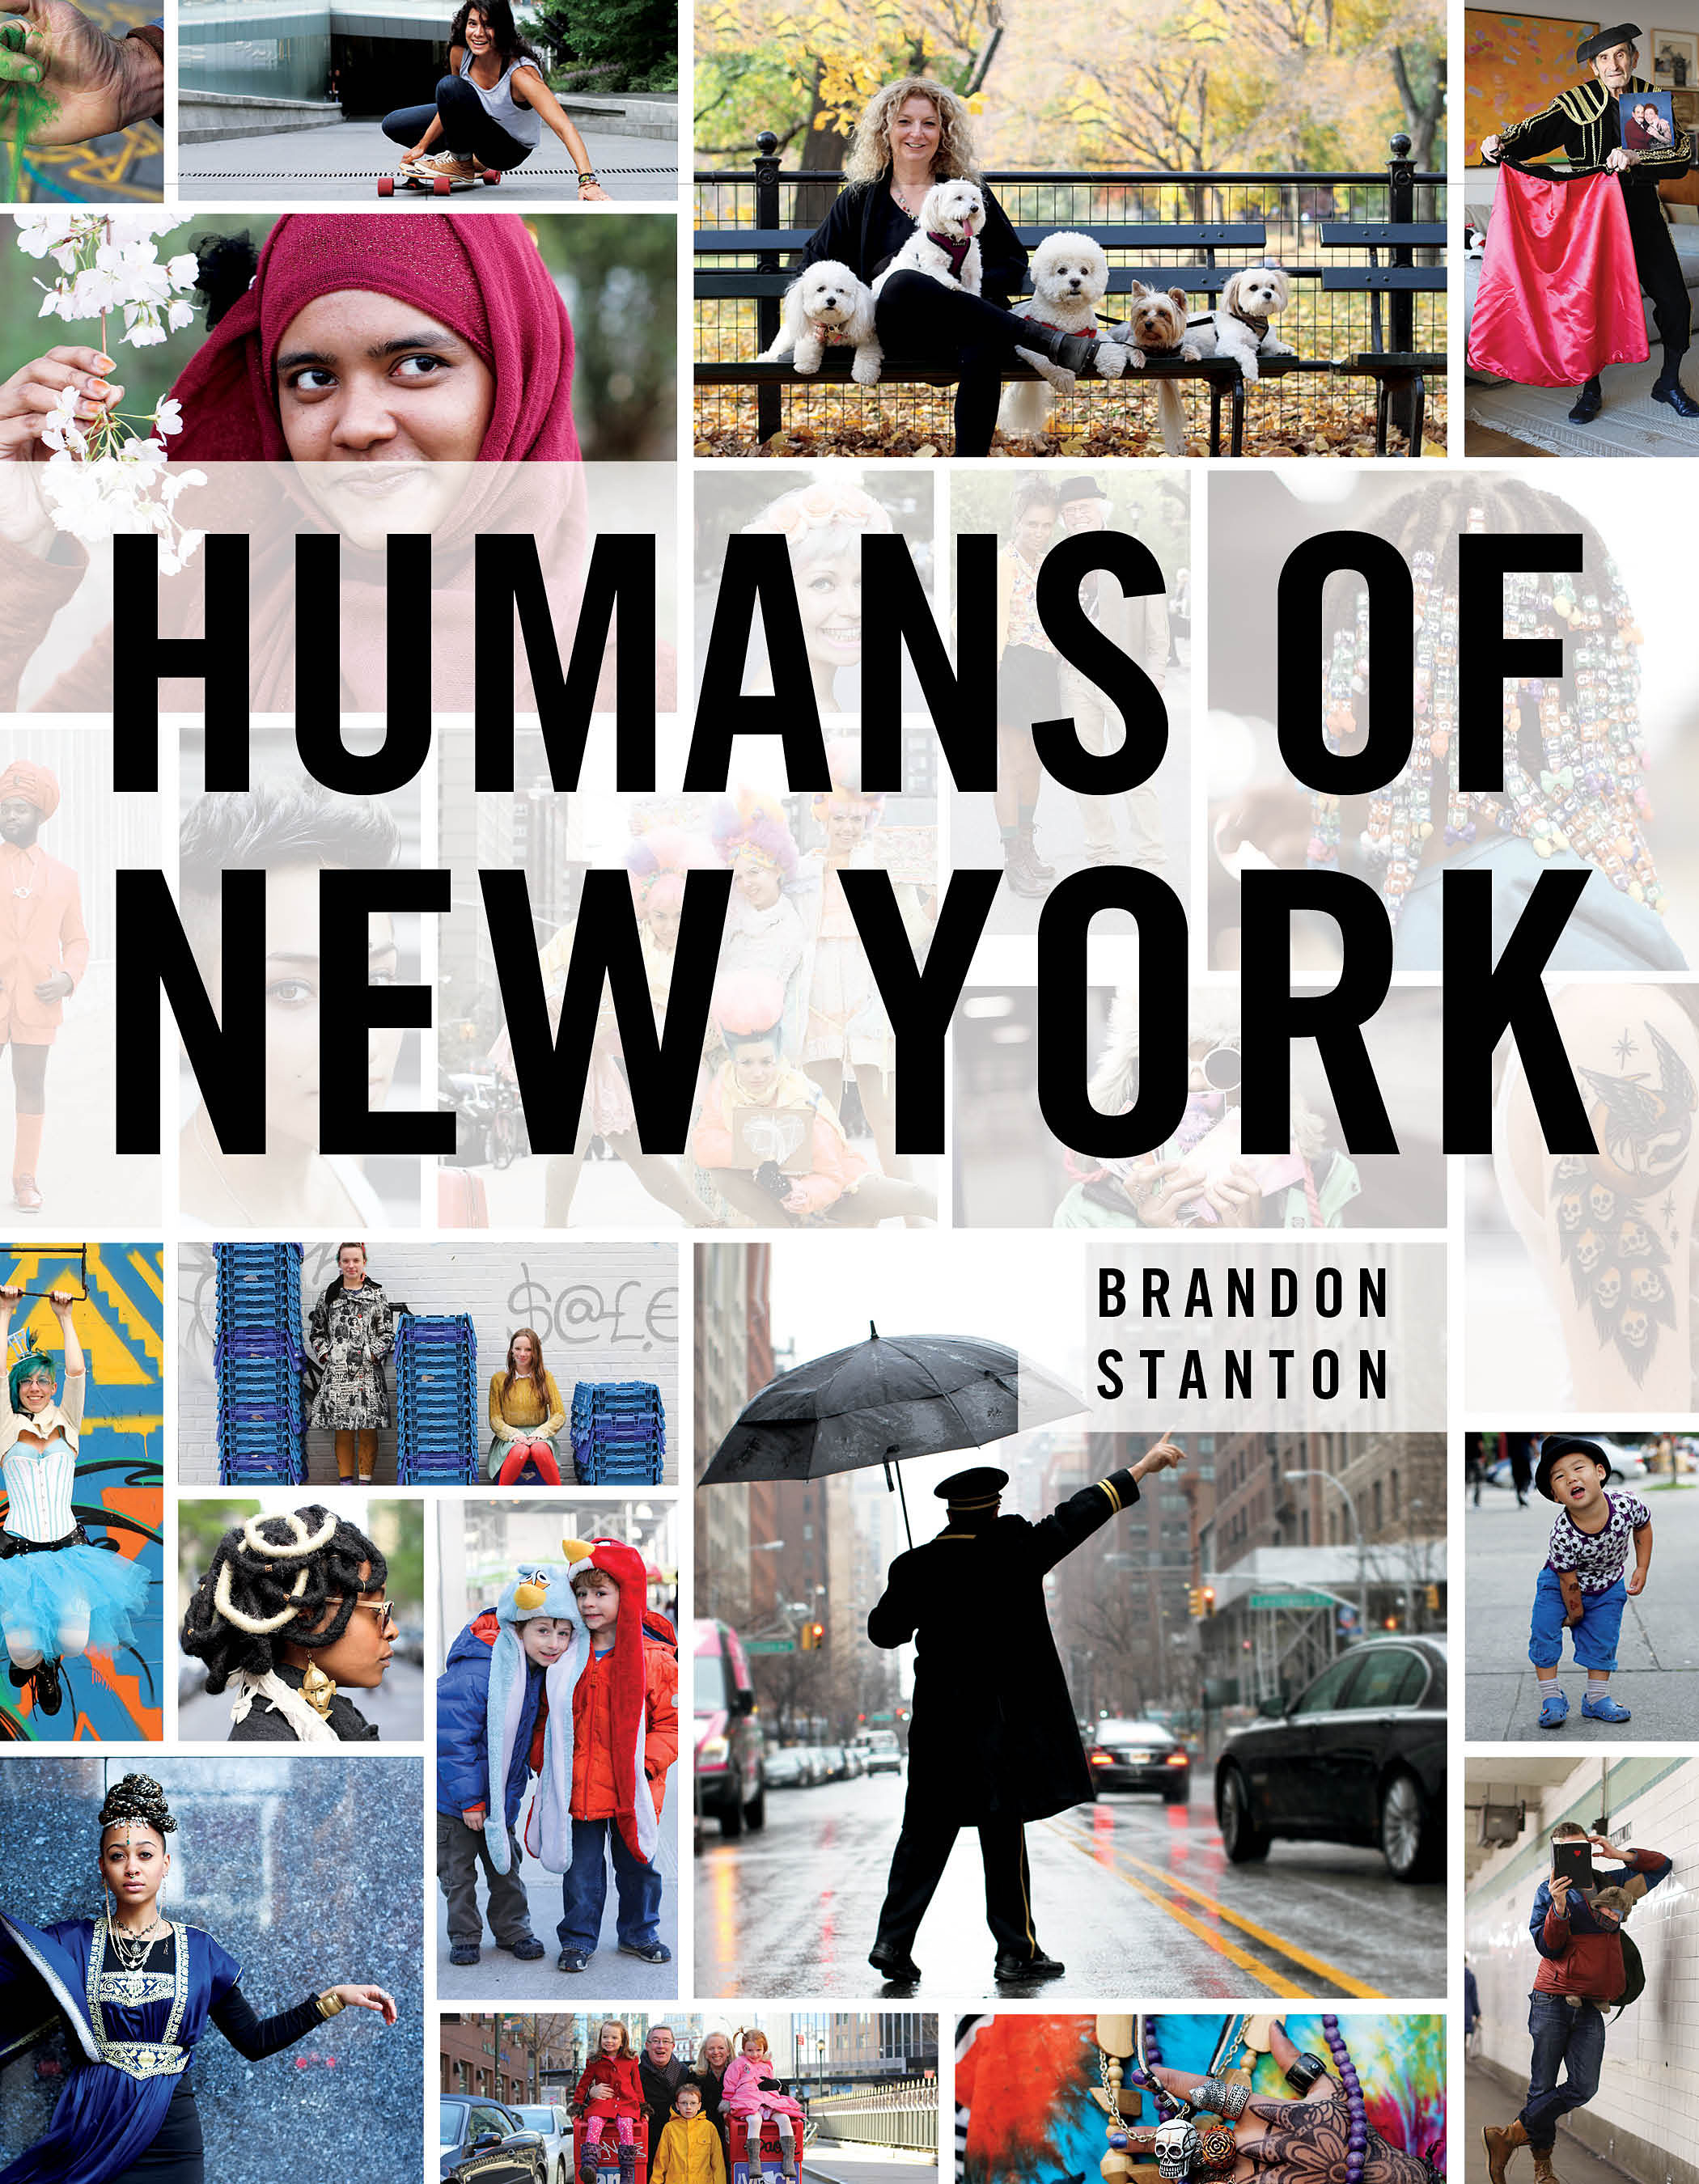 Brooklyn Book Launch: Humans of New York by Brandon Stanton